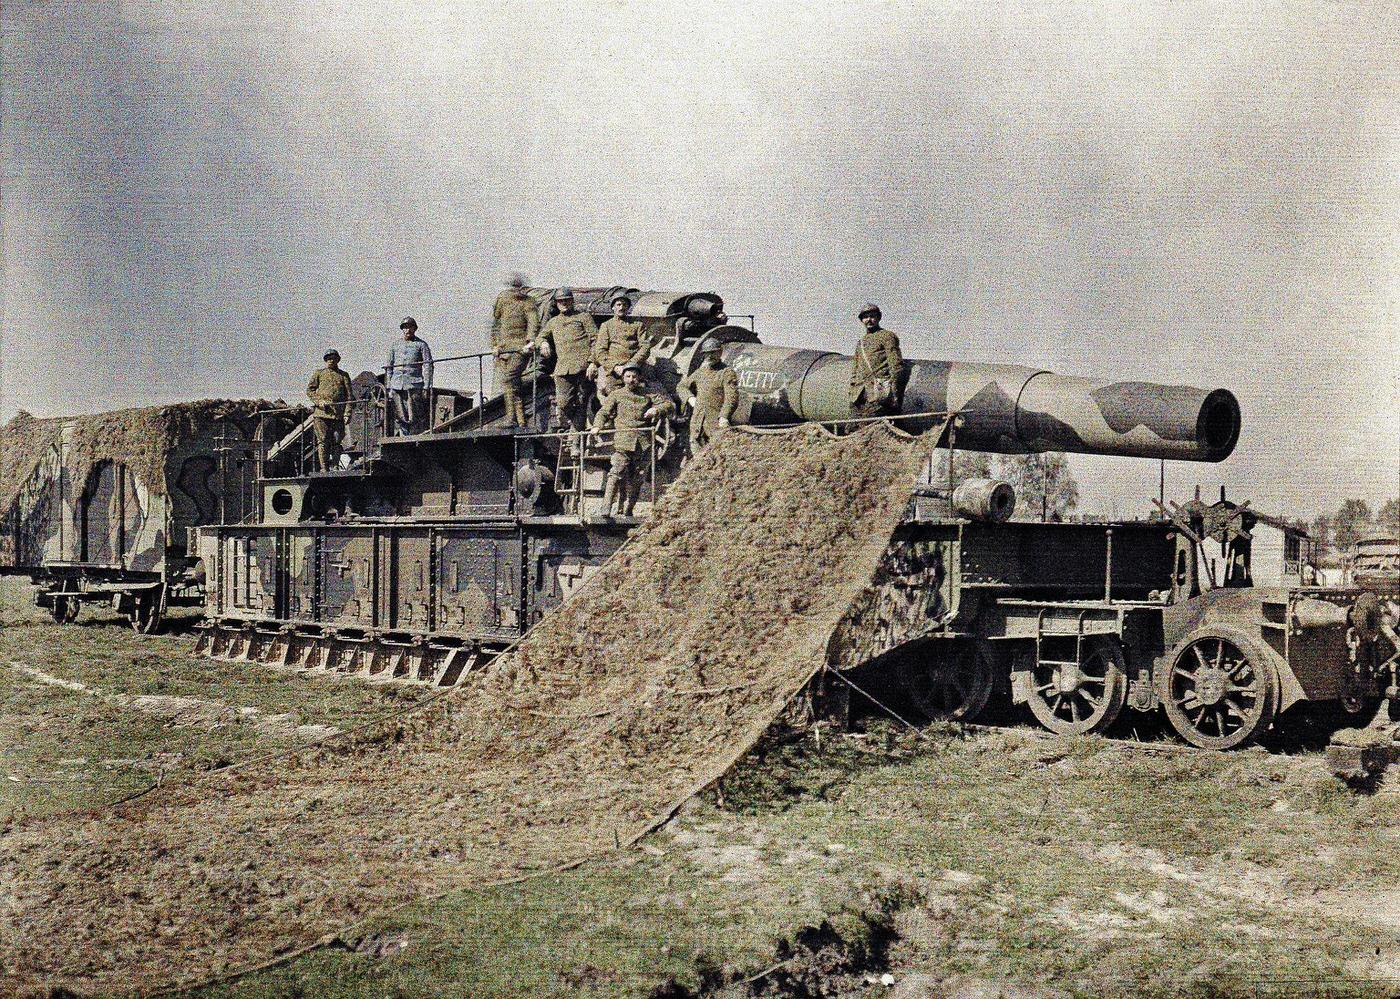 French soldiers camouflaging a 370 mm railway gun named "Keity" in Noyon, Oise region, France, September 5, 1917.